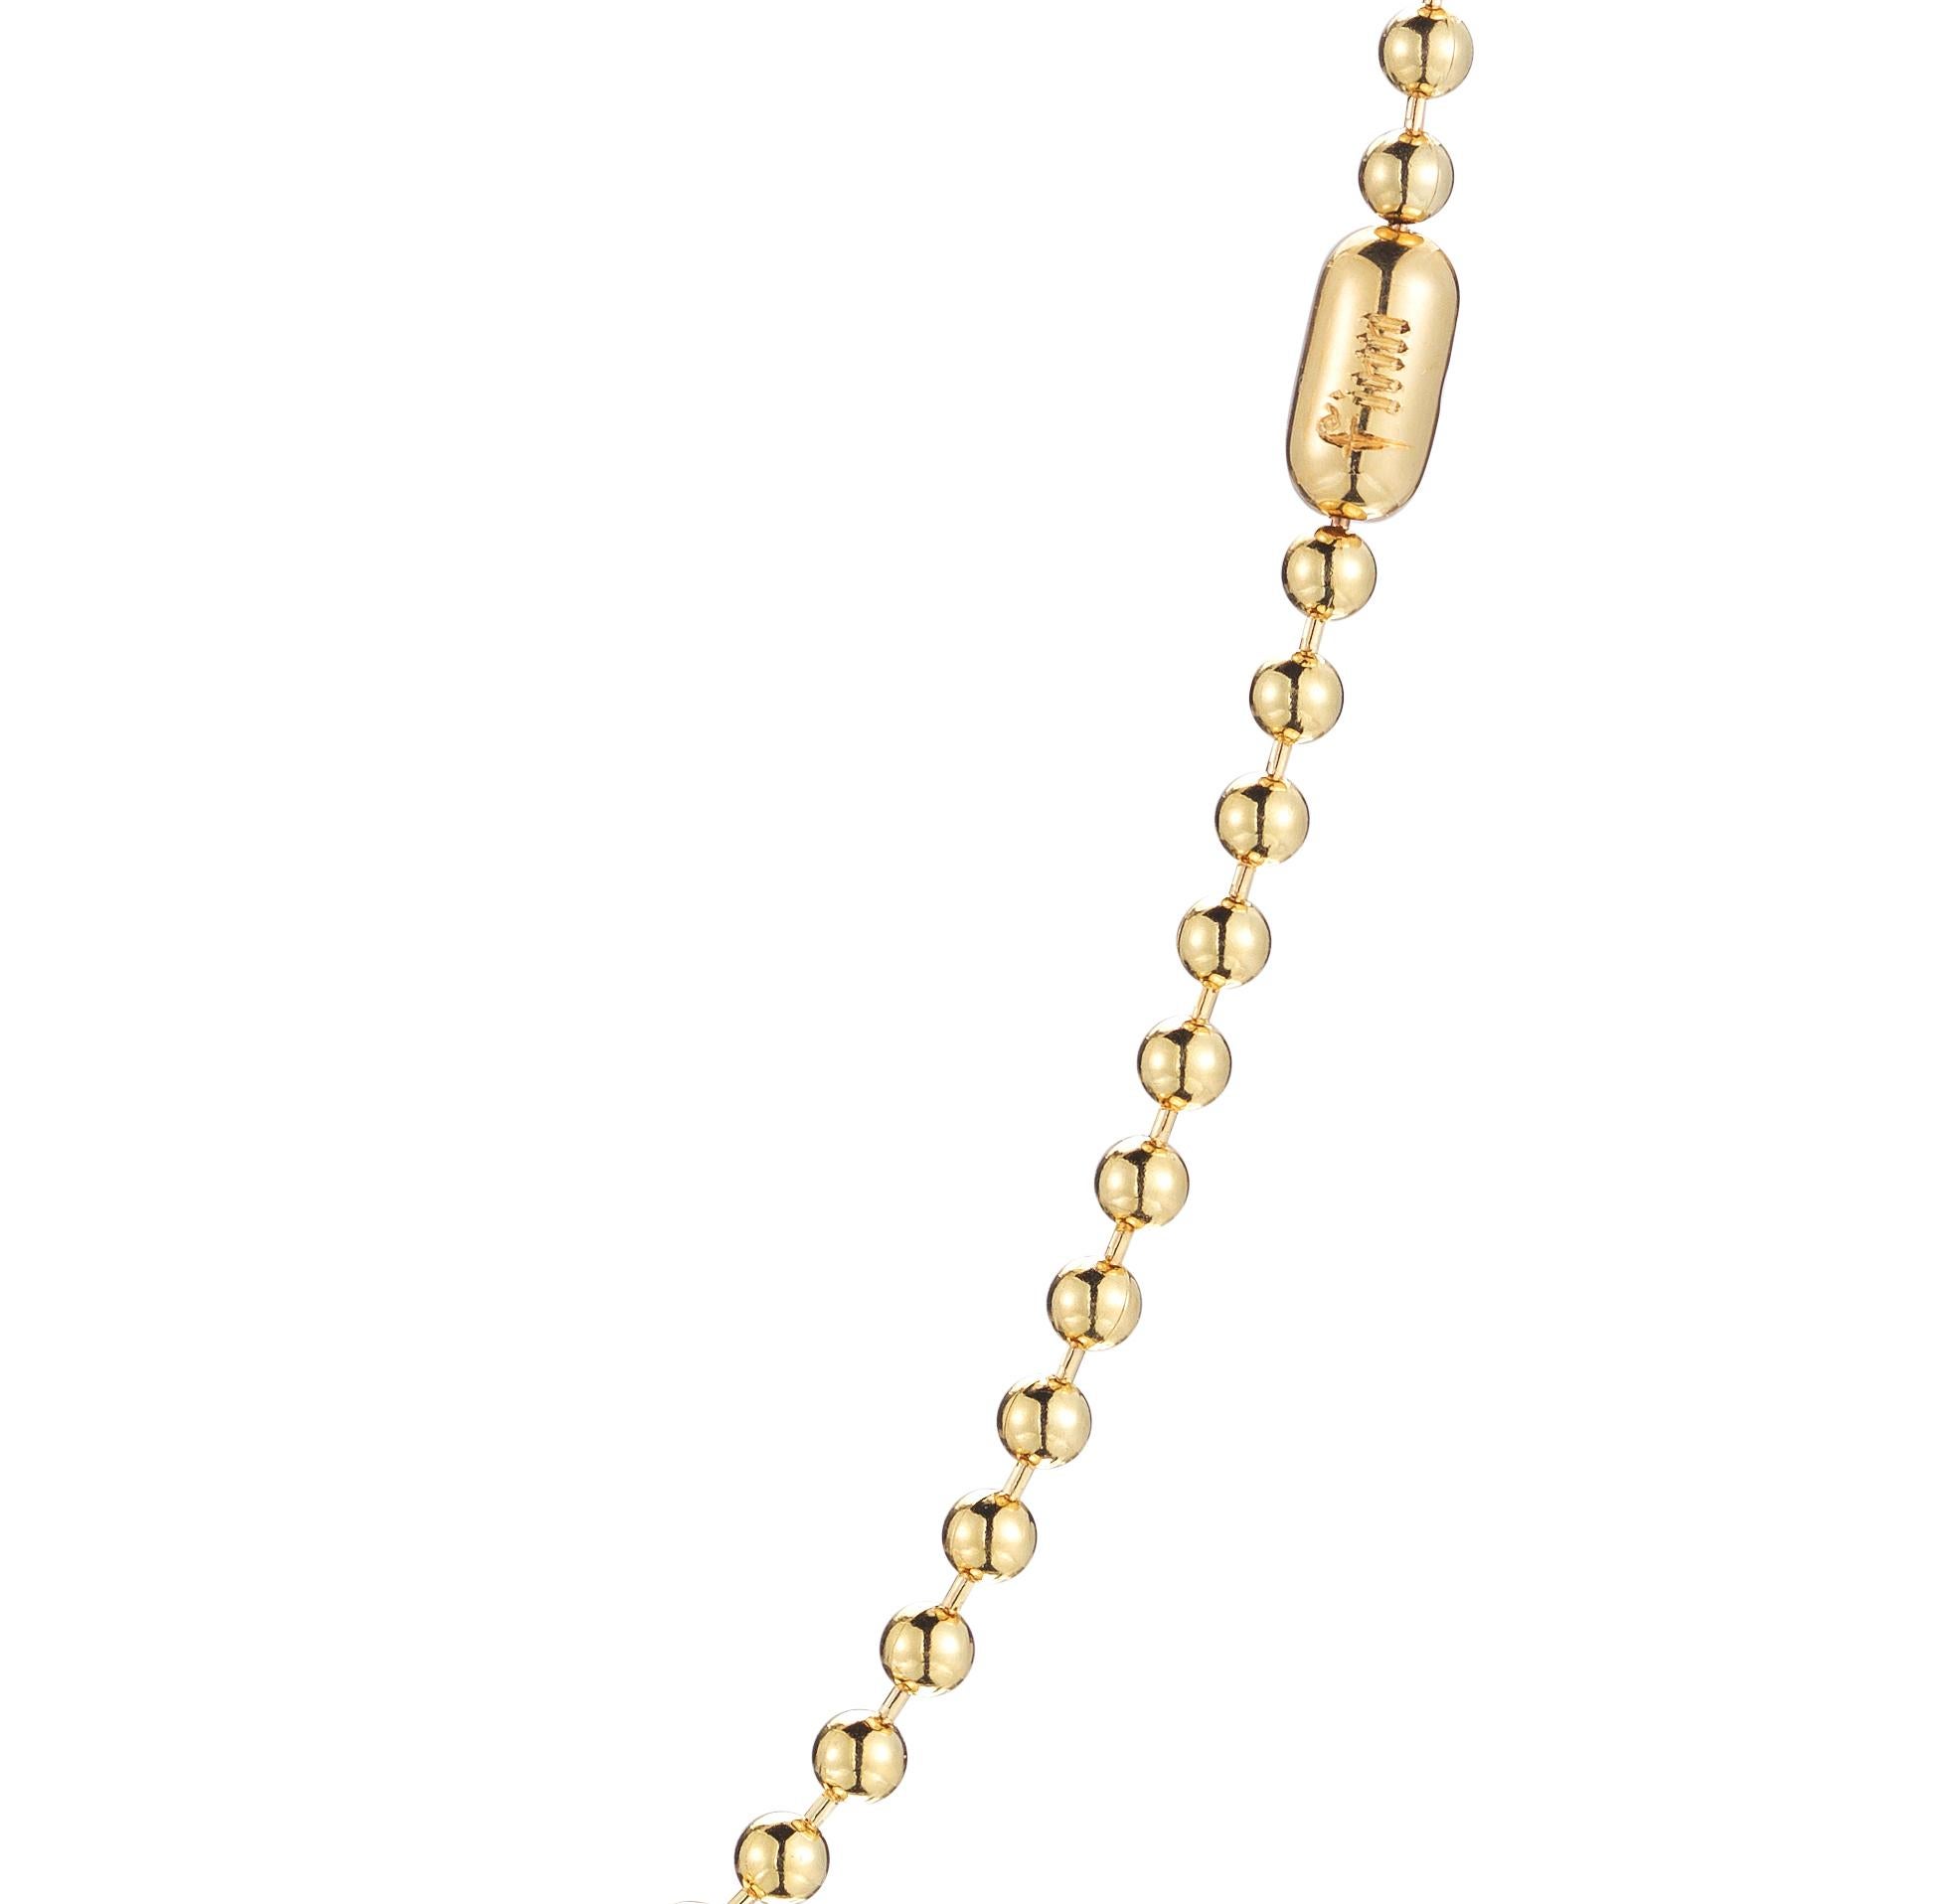 14k gold ball chain necklace